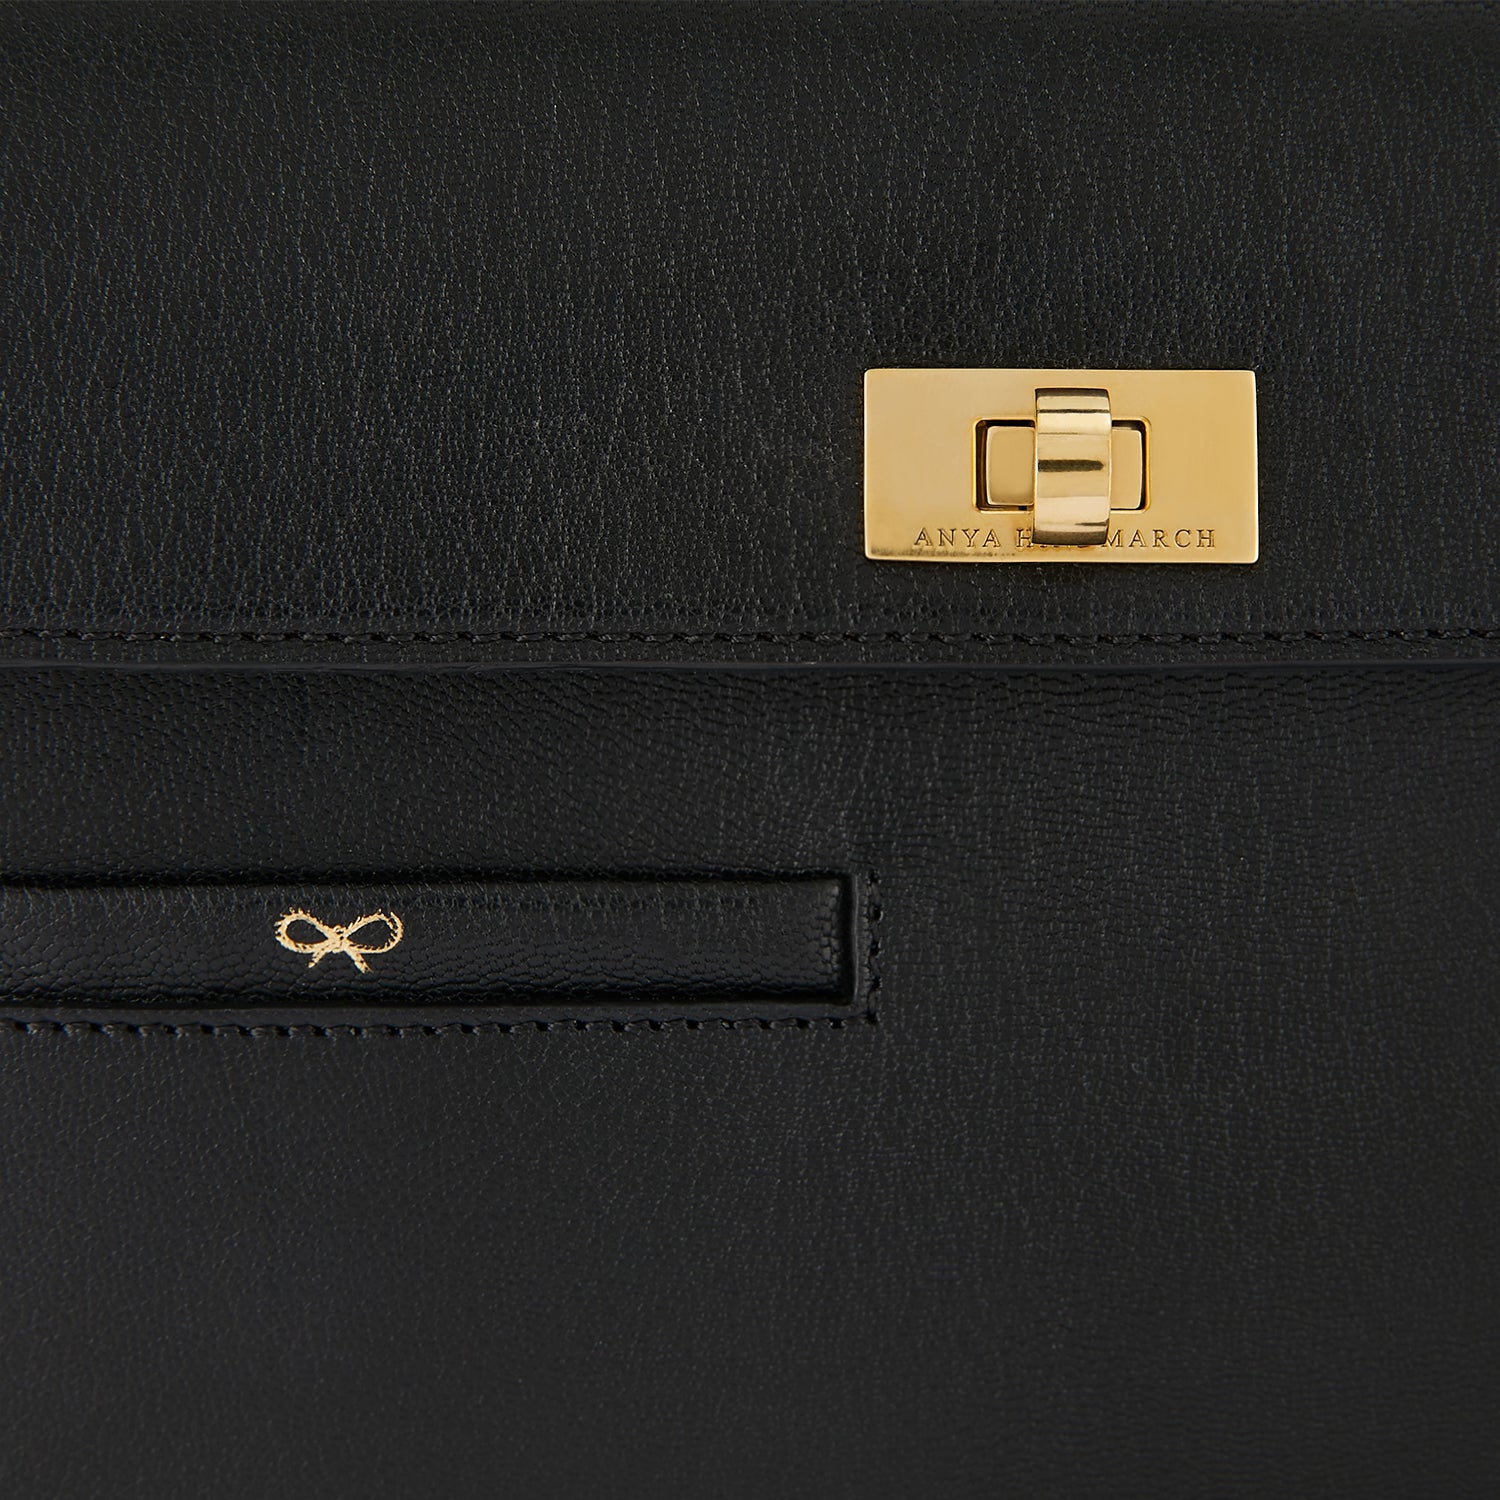 Mortimer Top Handle -

                  
                    Leather in Black -
                  

                  Anya Hindmarch EU
